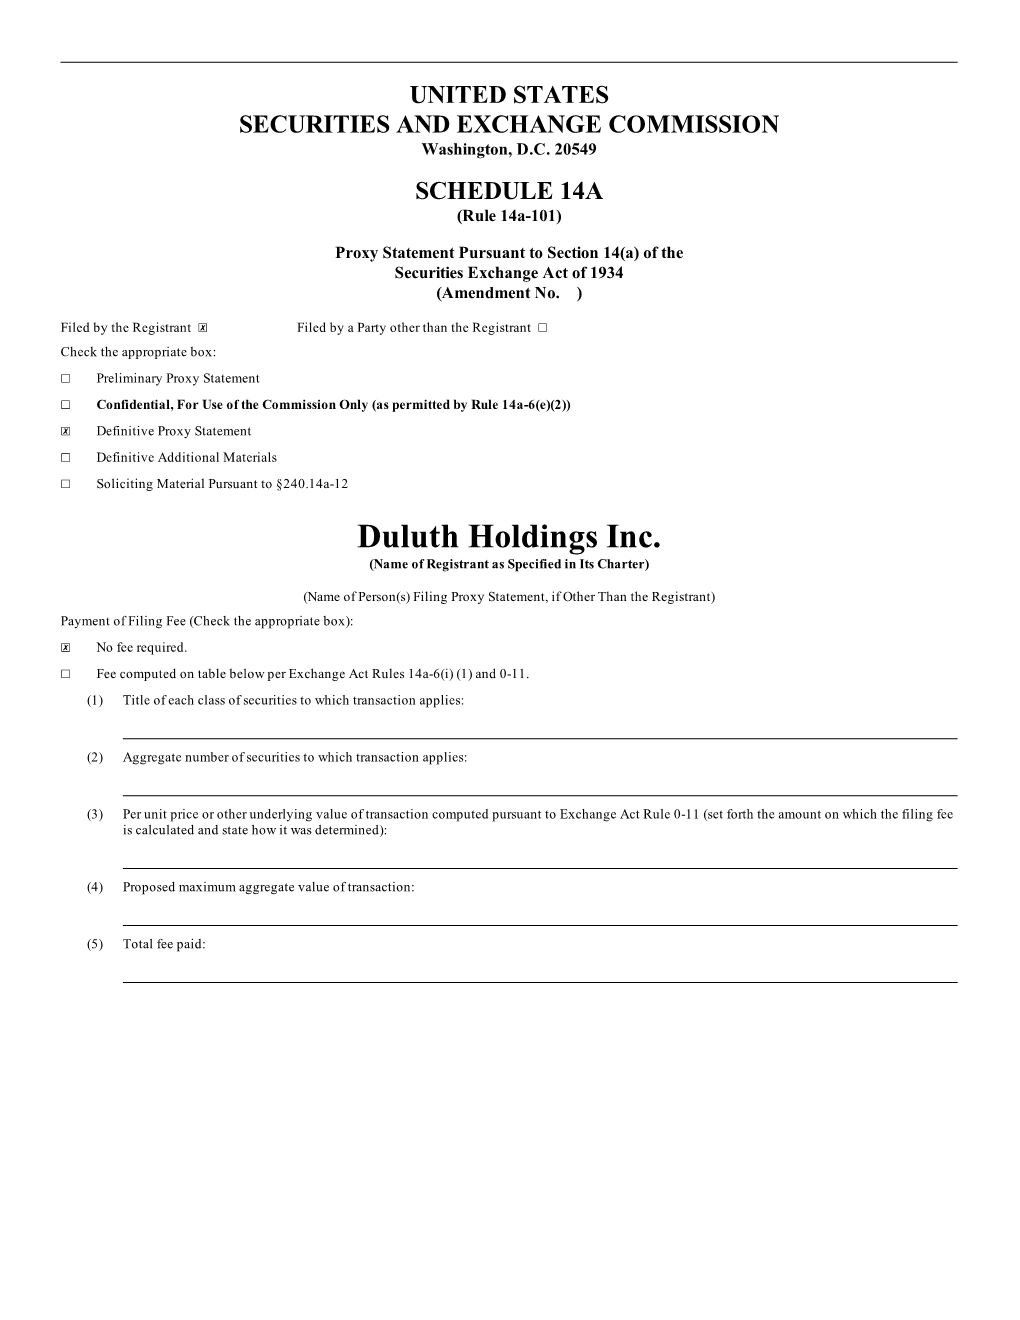 Duluth Holdings Inc. (Name of Registrant As Specified in Its Charter)